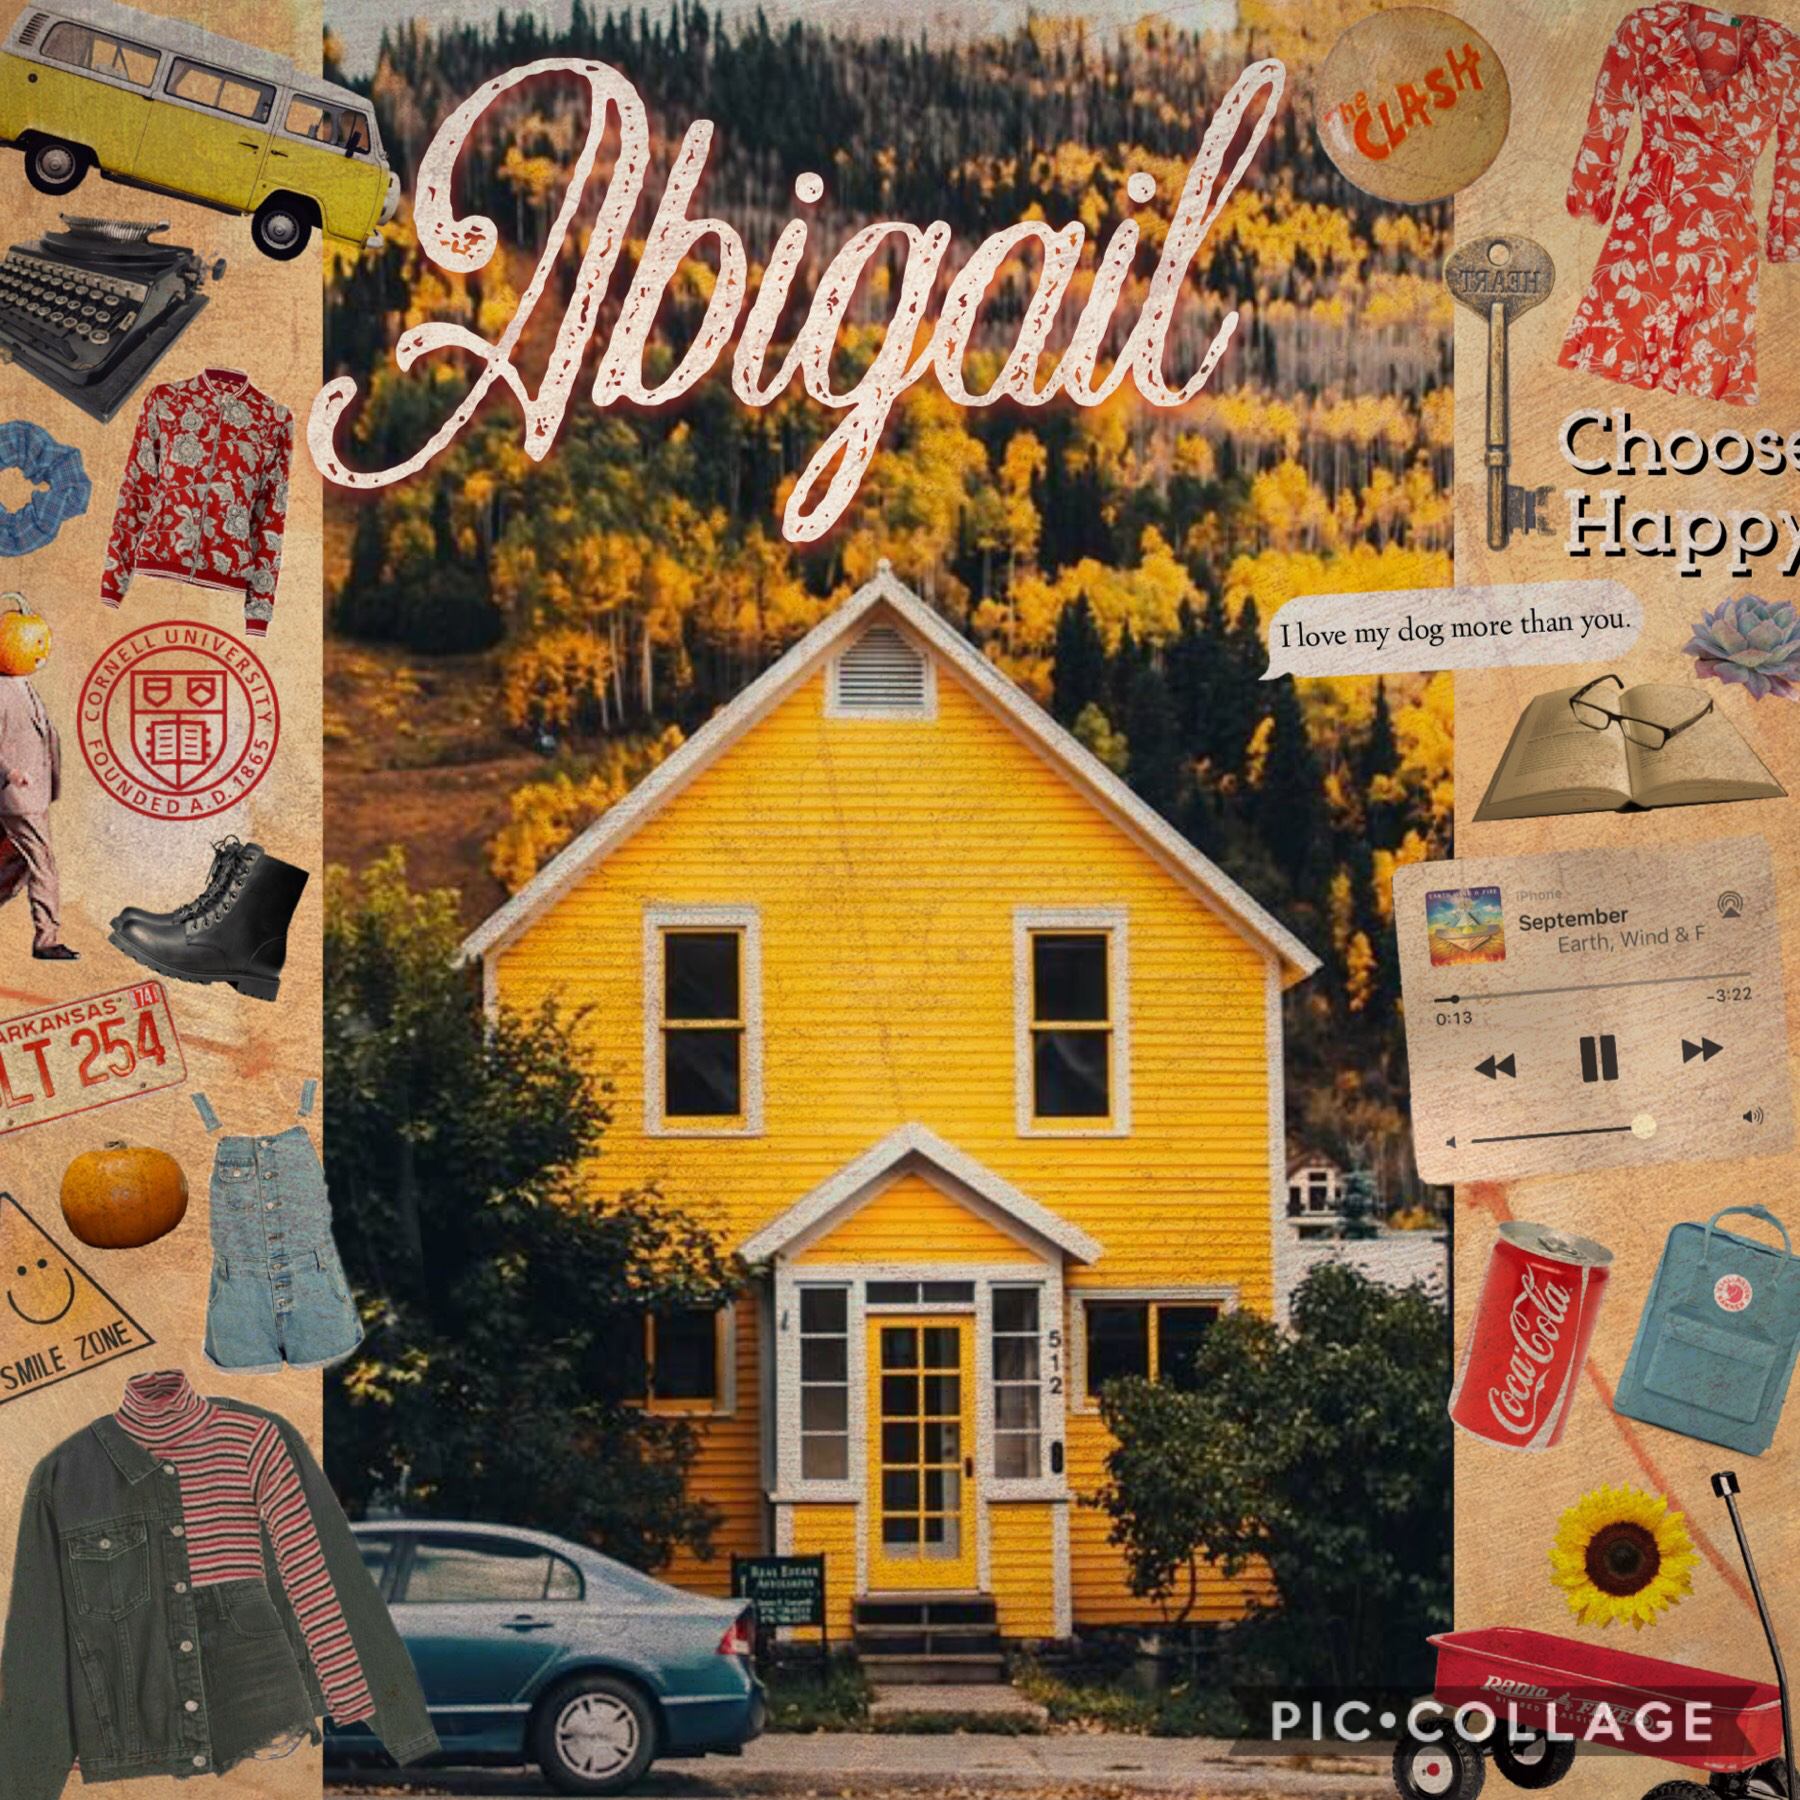 🧡Tap🧡
Here’s a Moodboard for the name Abigail
QOTD: If you could rename yourself, what would you choose?
AOTD: Probably something still along the lines of Laci, like Lauryn or Lucille.